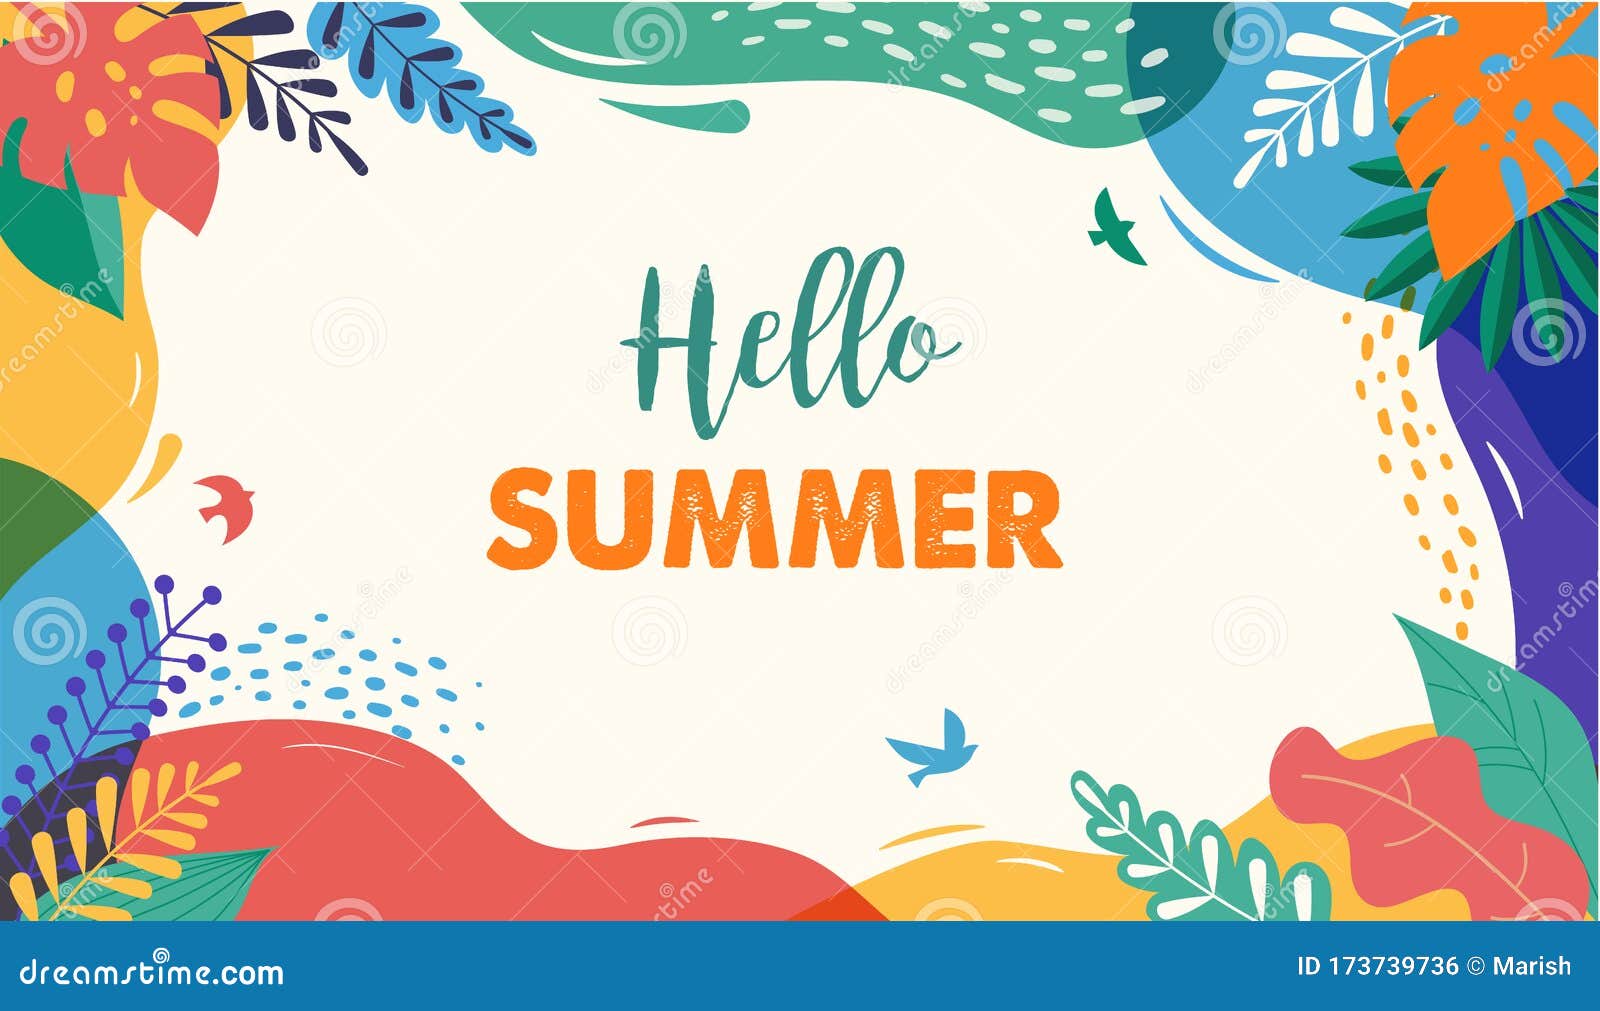 Hello Summer, Festival and Fair Banner Design with Vintage Colors Intended For Summer Fair Flyer Template